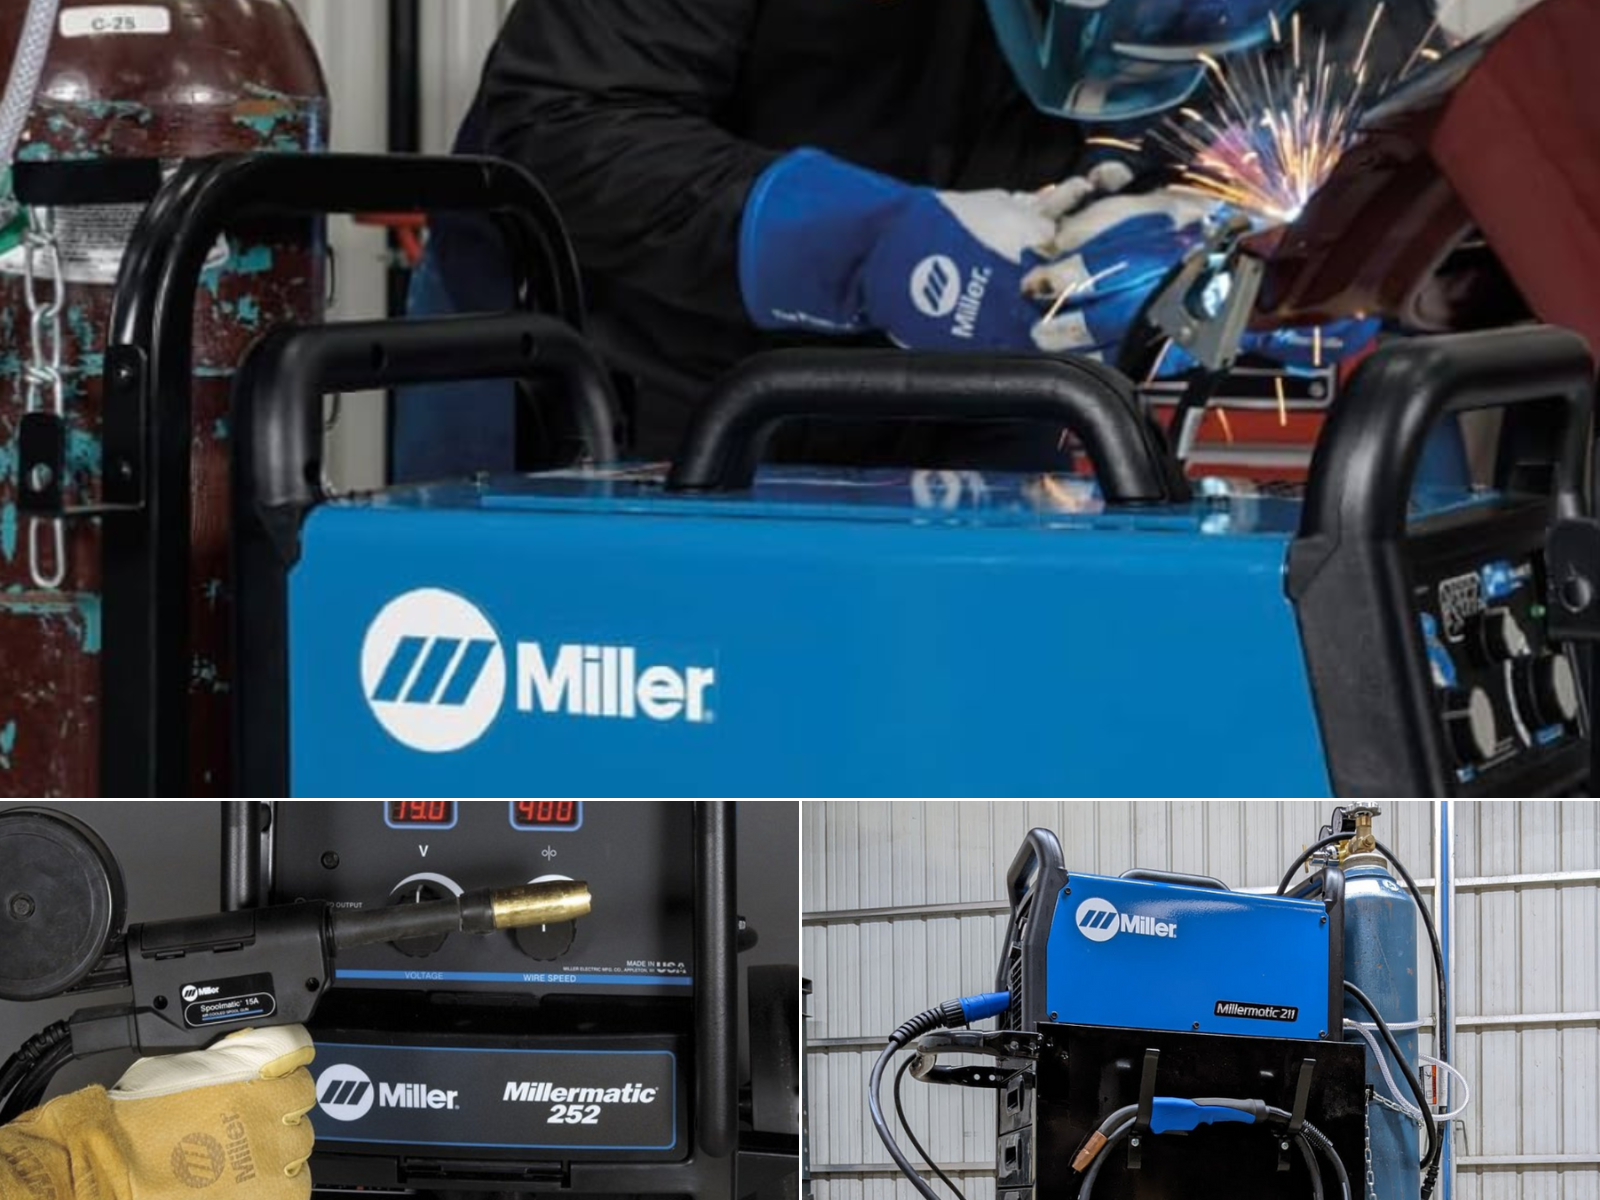 Three different Miller welders, MIG machine w/flux, MIG machine w/solid core, and a spool gun on a Millermatic 252